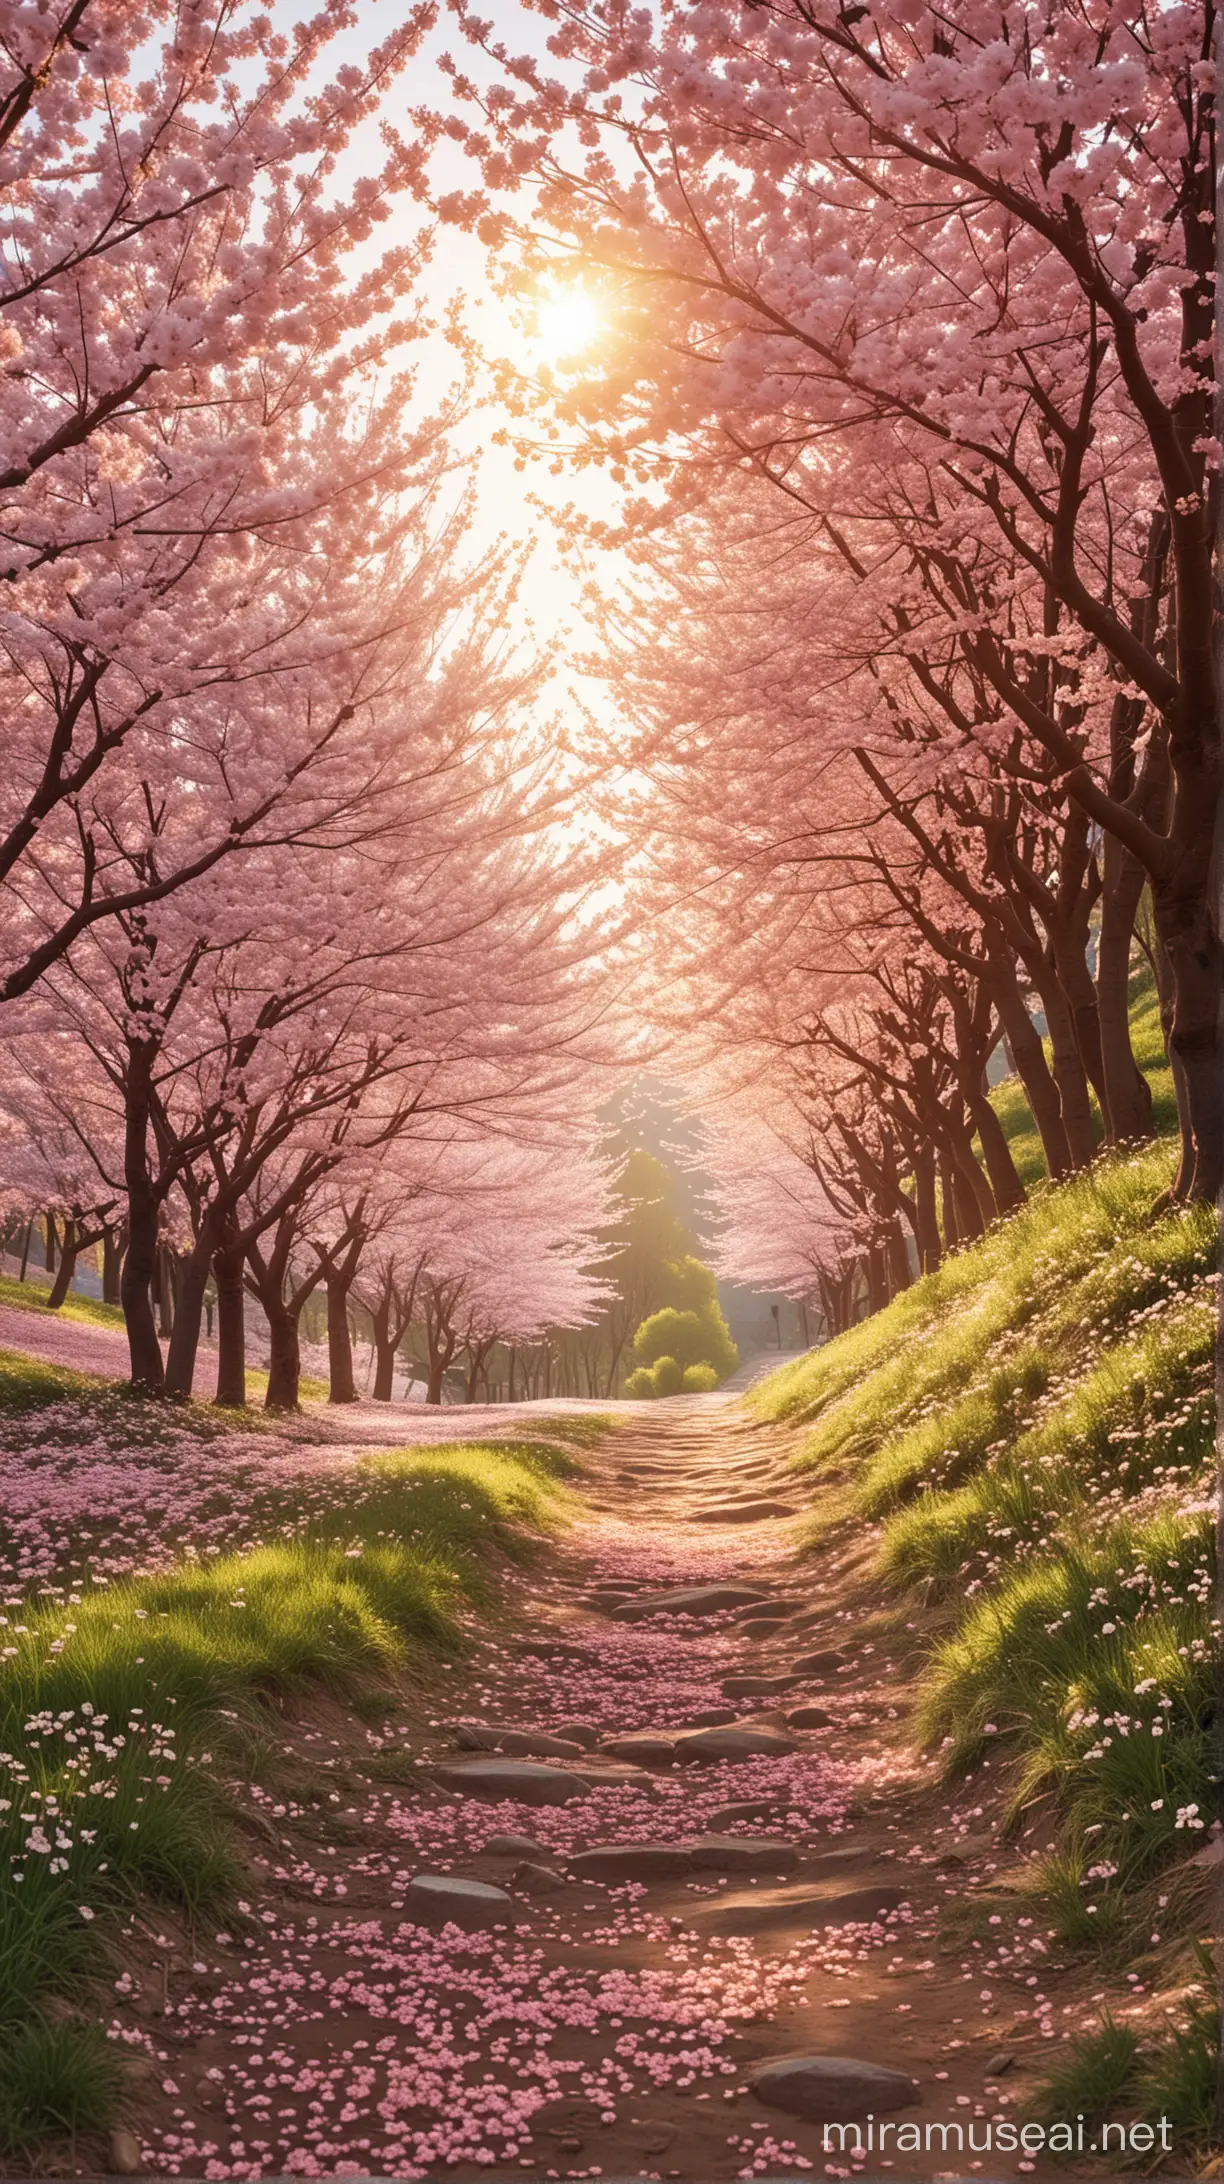 A breathtakingly beautiful real-life photograph of a small hill lined with first bloomed cherry blossom trees, the plenty of cherry blossom petals, sunlight filtering through the petals creating a serene and magical atmosphere, masterpiece,best quality, highres, 8K photograph, Nikon